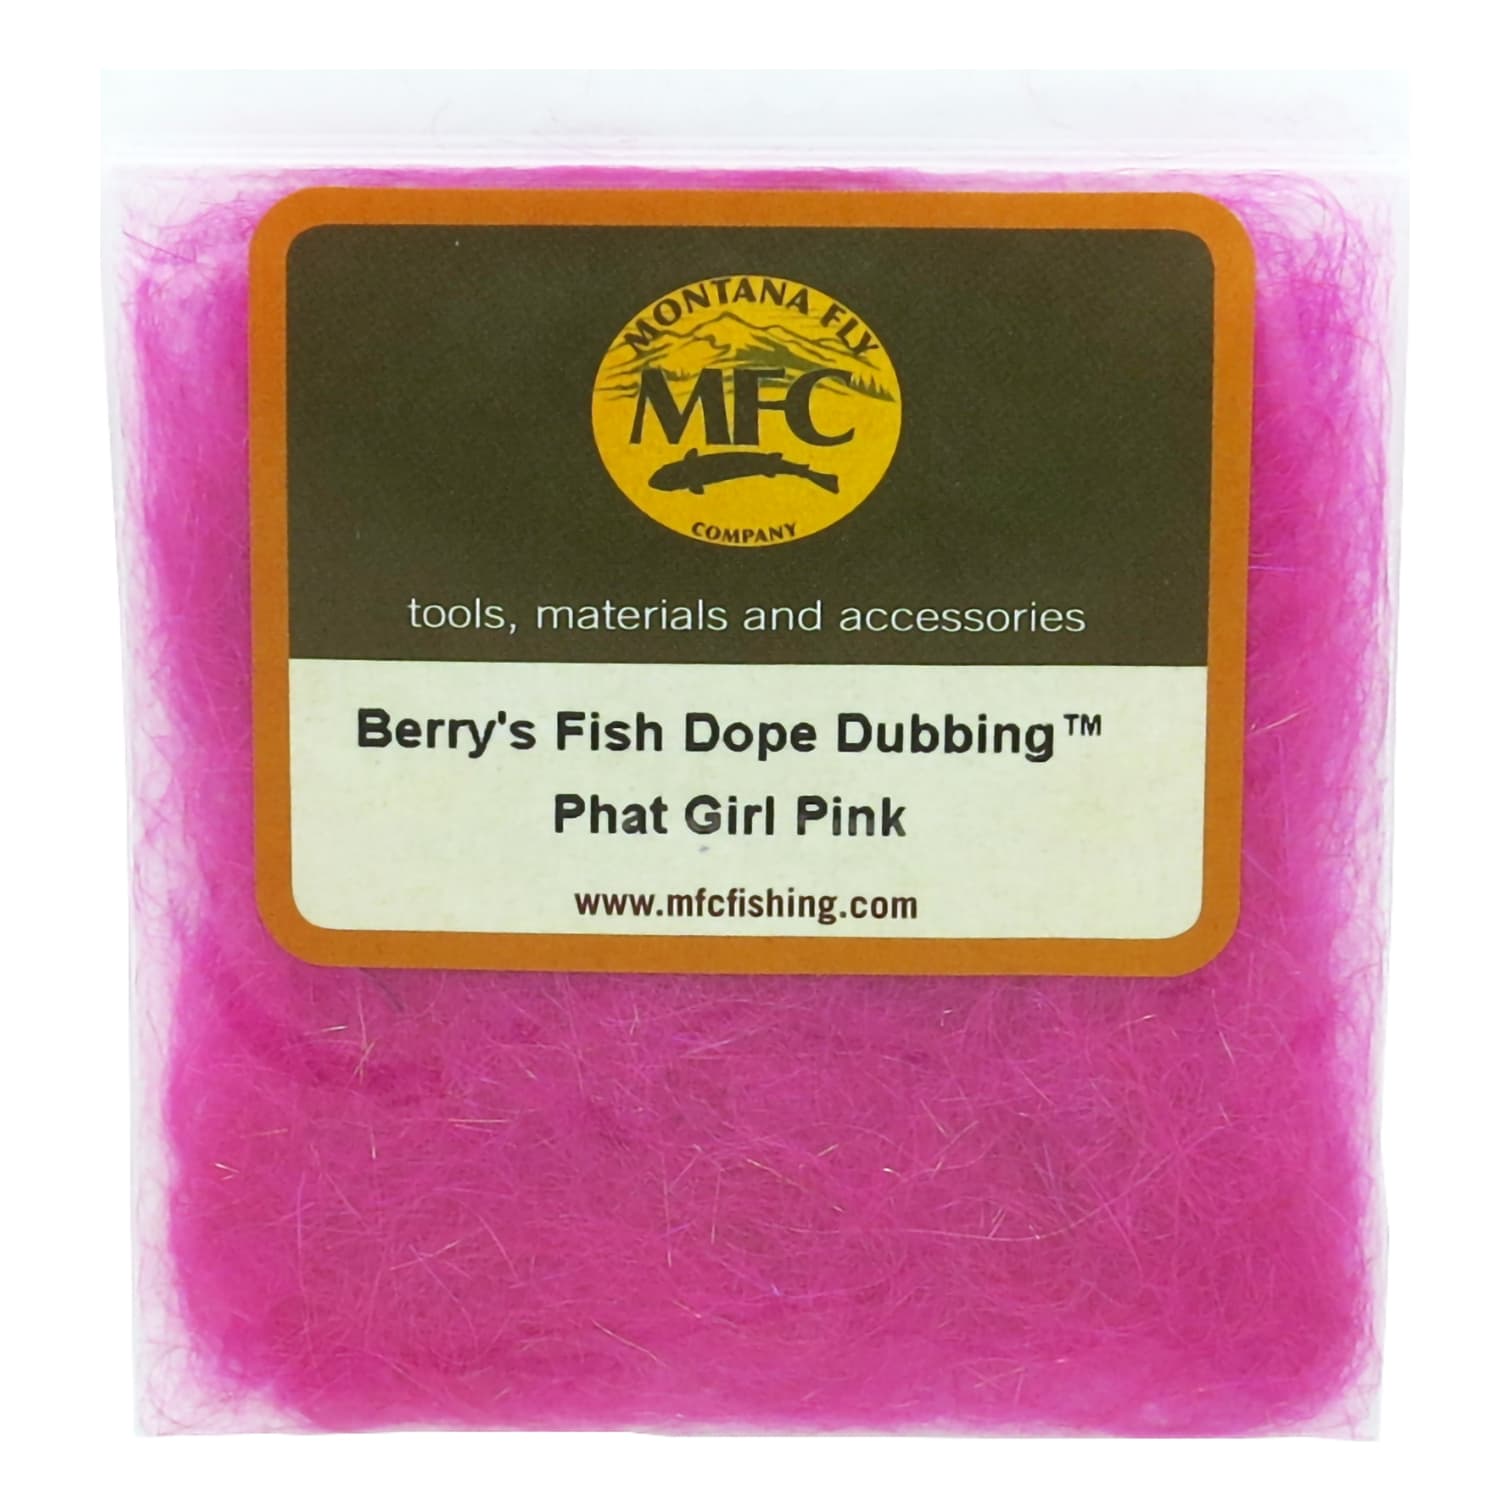 Montana Fly Company Berry’s Fish Dope Dubbing - Phat Girl Pink